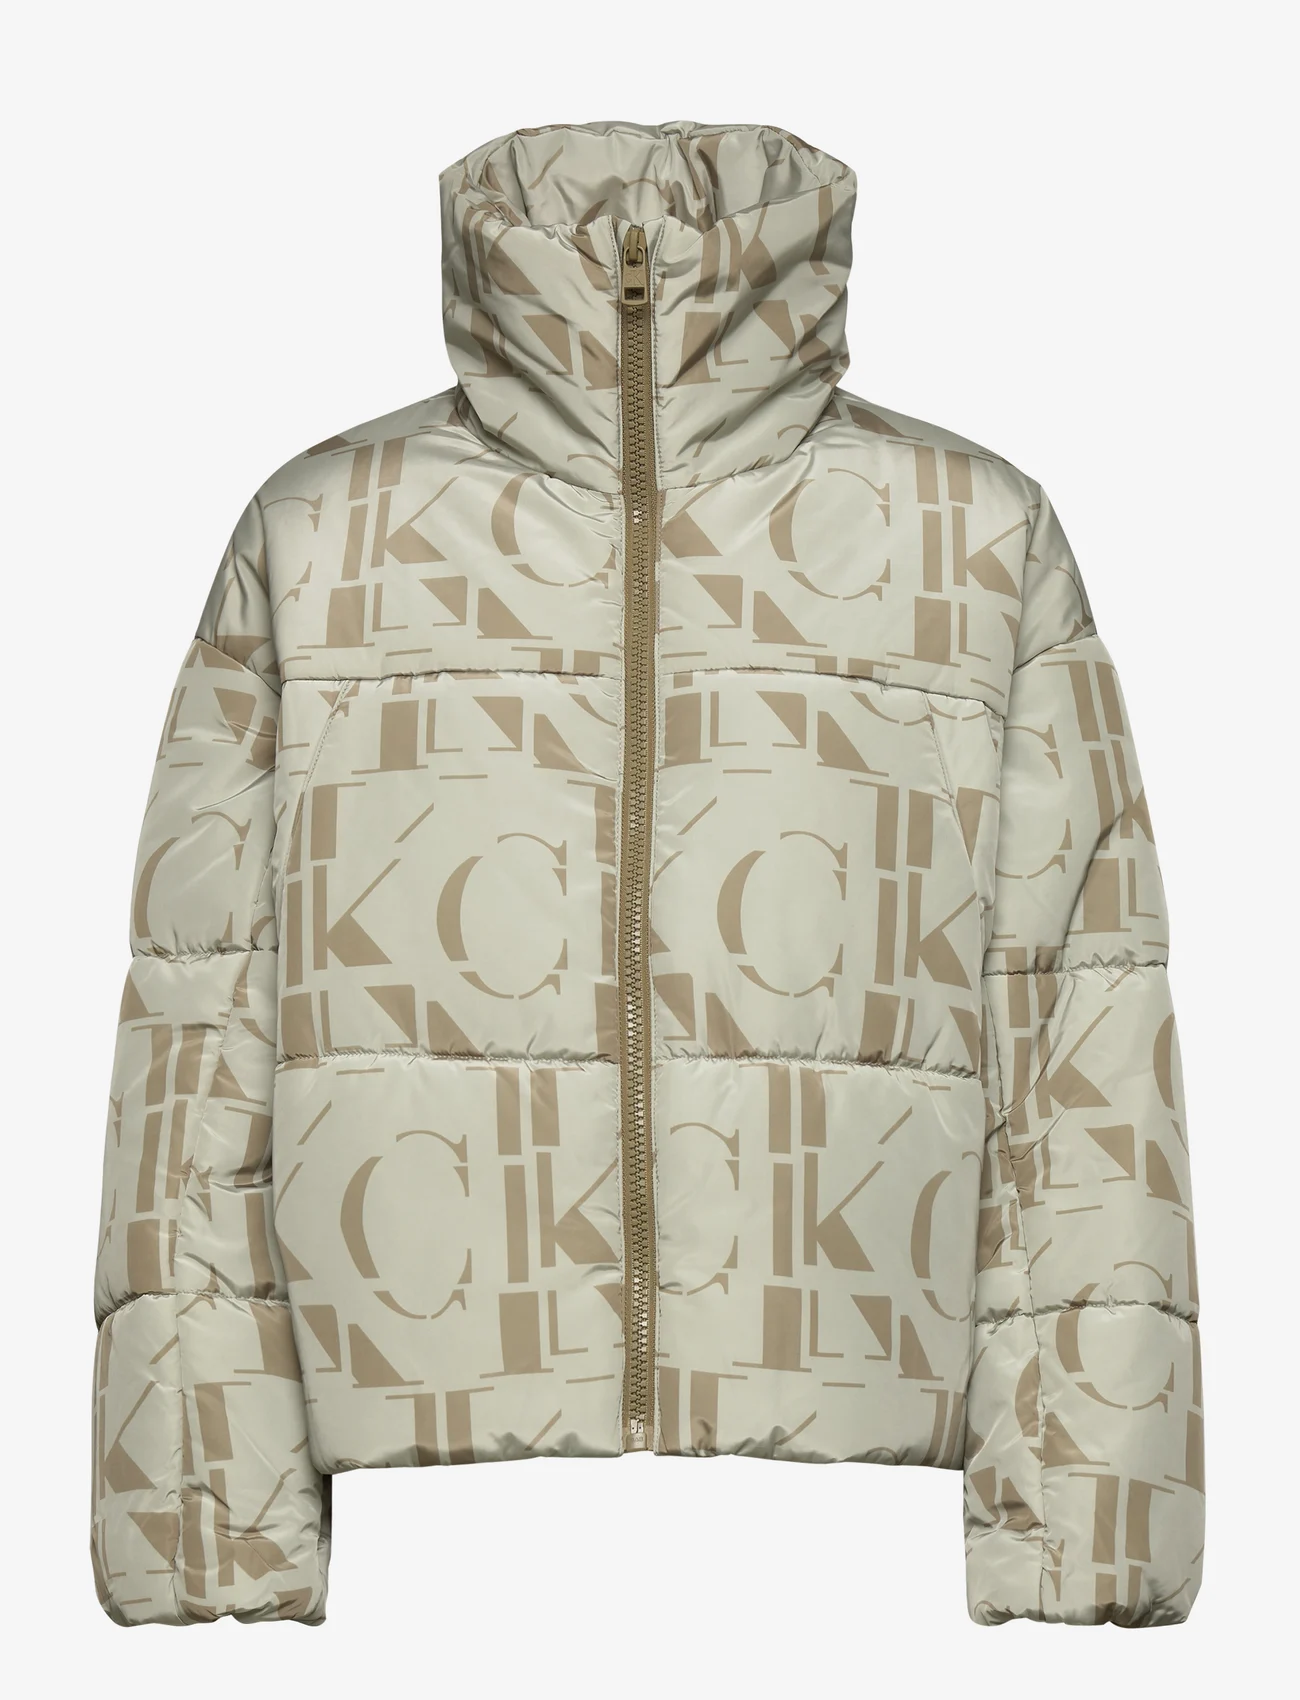 Calvin Klein Jeans Ck Aop Oversized Puffer Jacket  €. Buy Down- &  padded jackets from Calvin Klein Jeans online at . Fast delivery  and easy returns